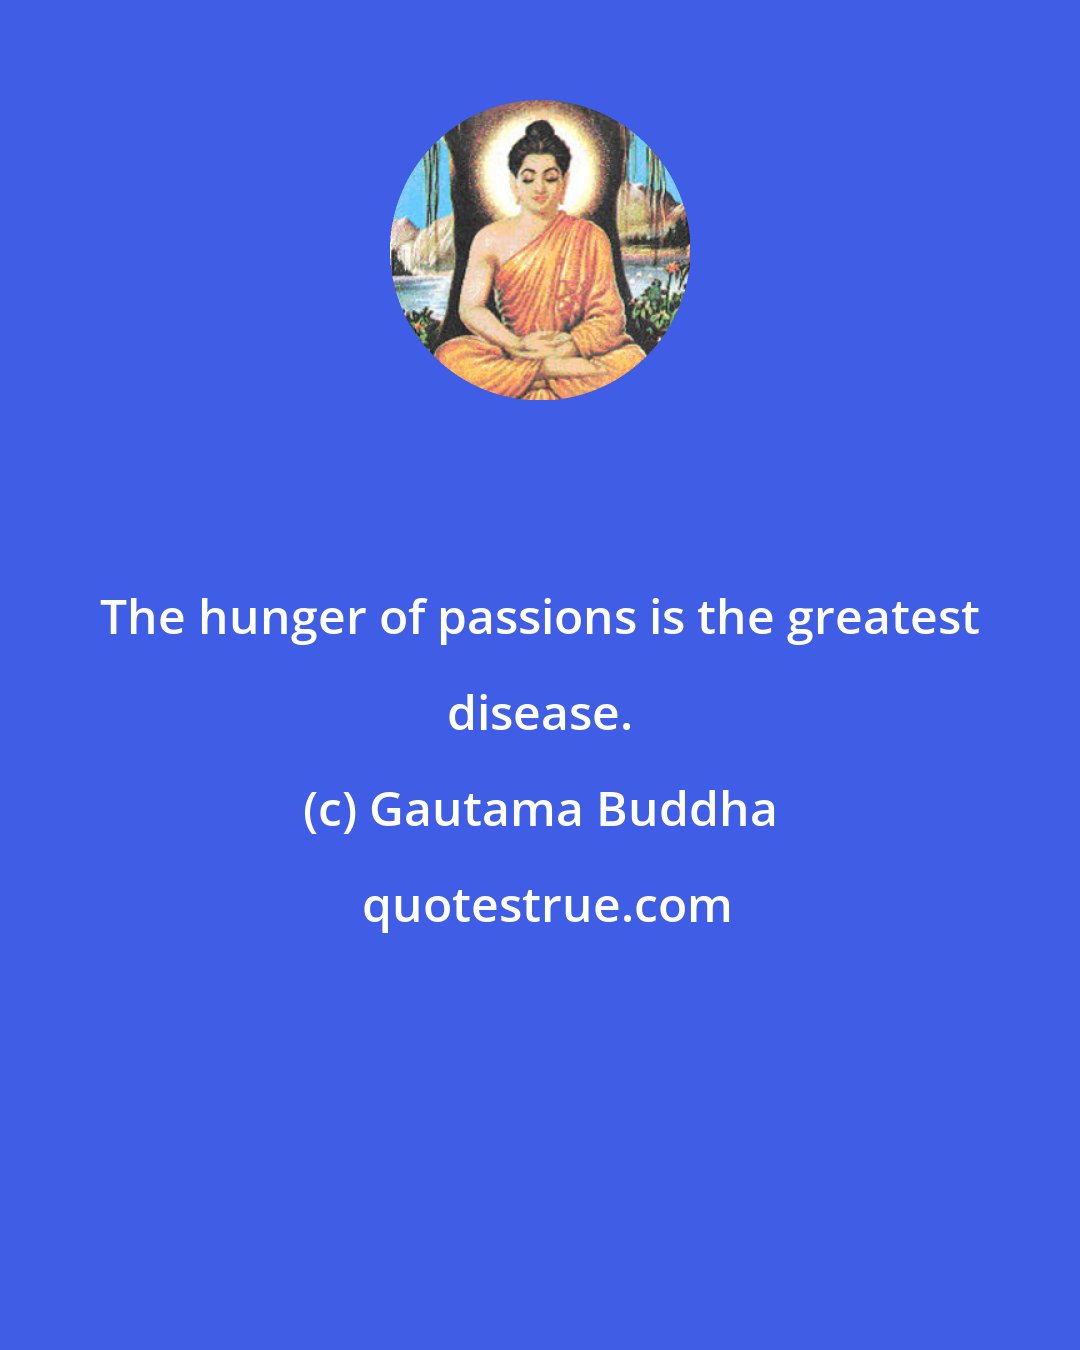 Gautama Buddha: The hunger of passions is the greatest disease.